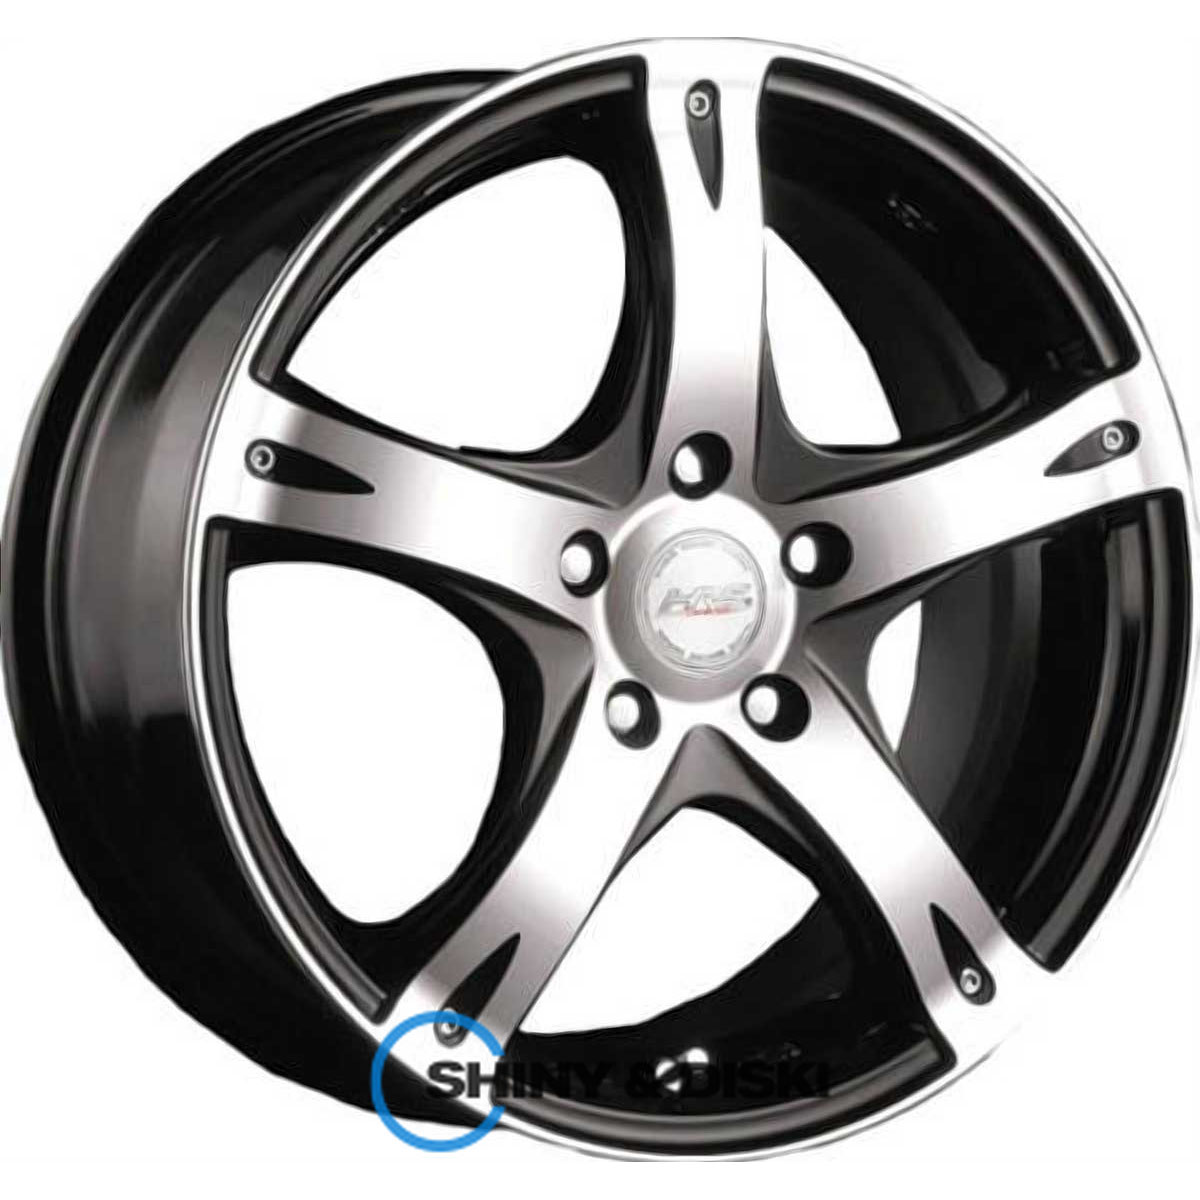 rs tuning h-366 gmfp r15 w6.5 pcd4x114.3 et40 dia67.1